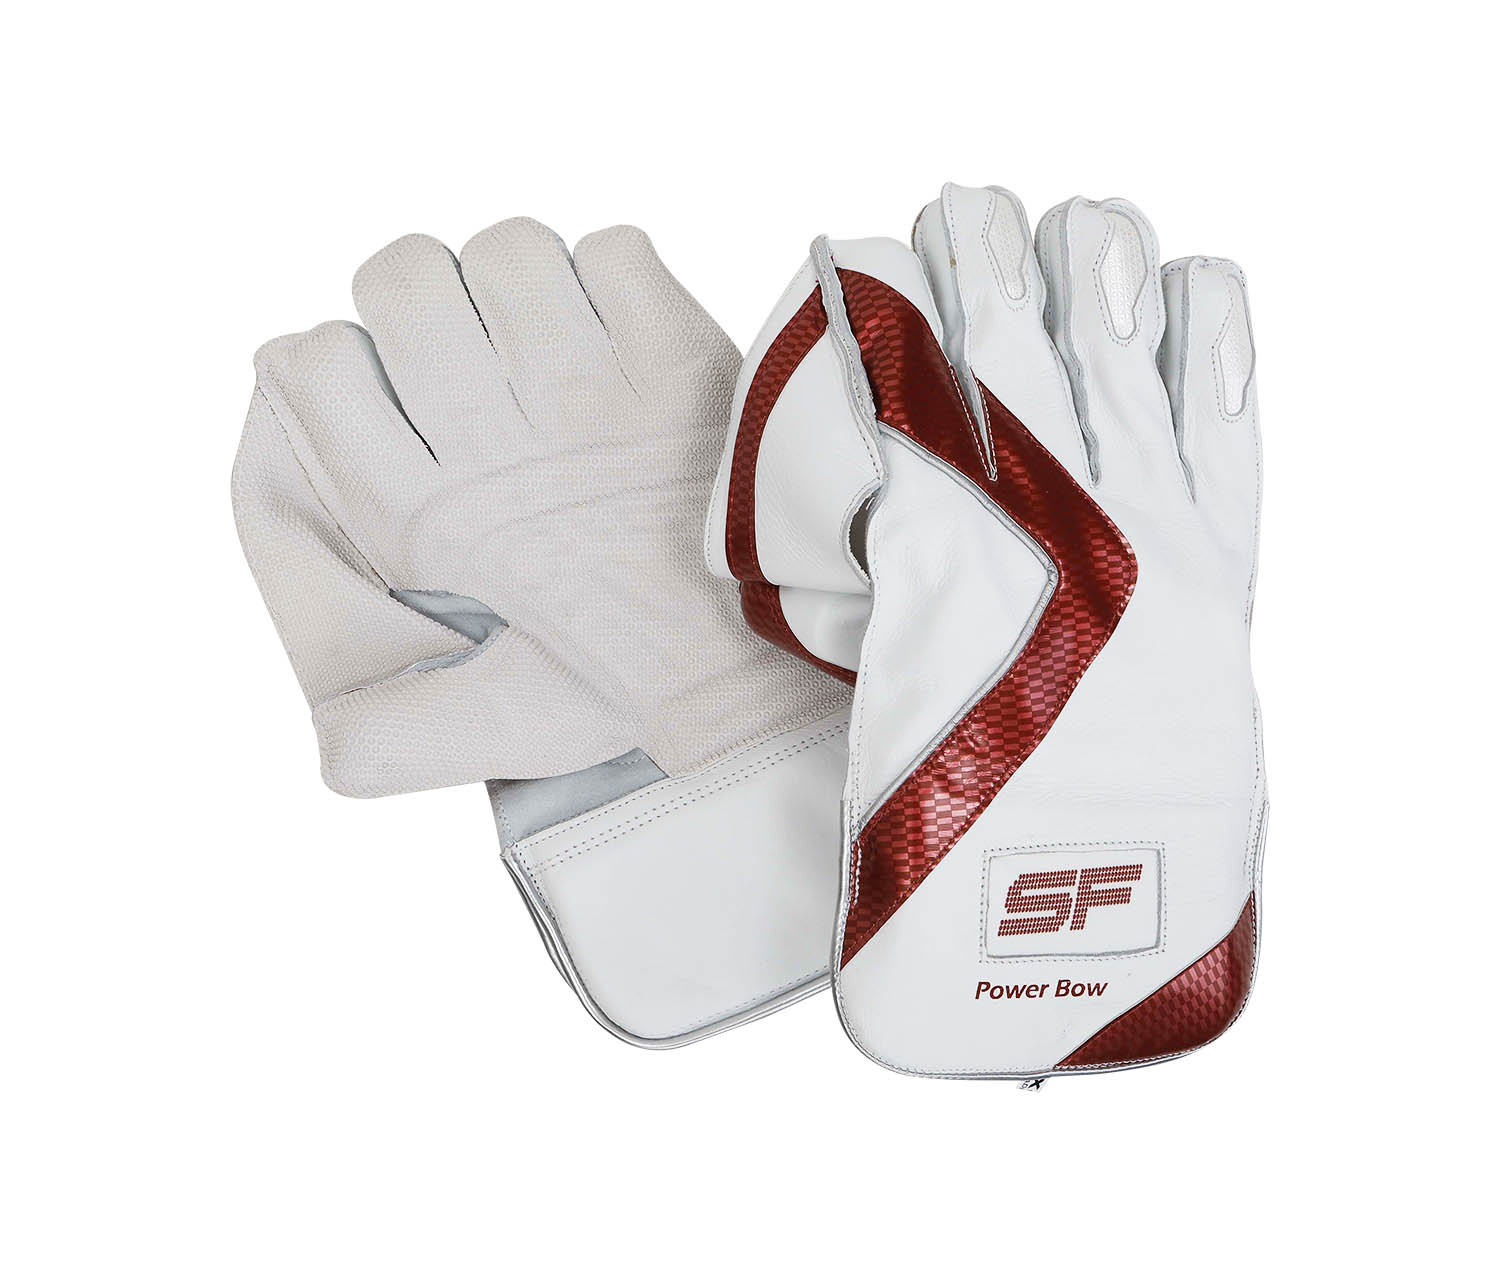 SF POWER BOW WICKET KEEPING GLOVES -2023